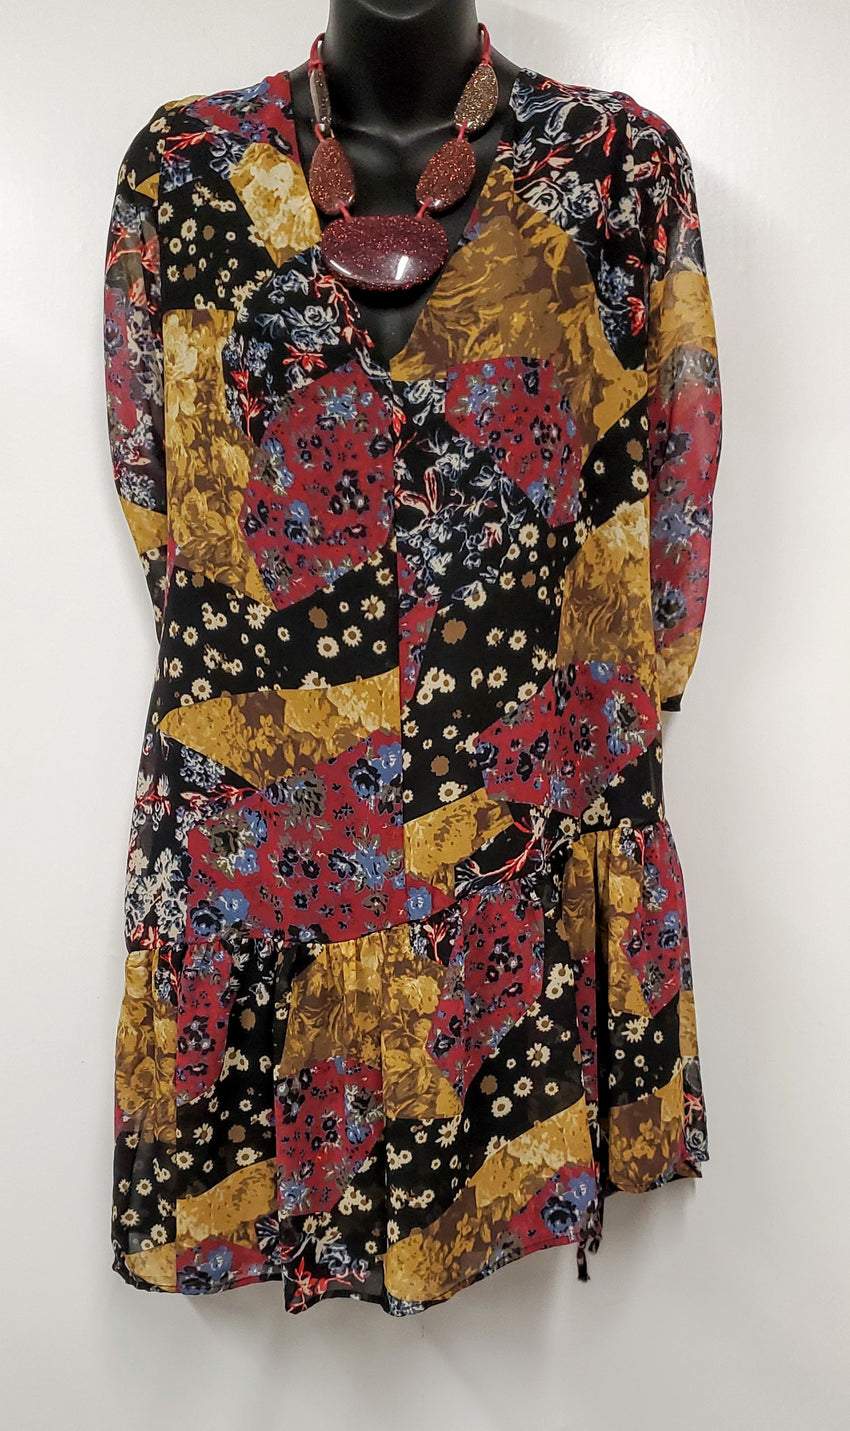 BCBG Multi-Print and Colored Summer Dress